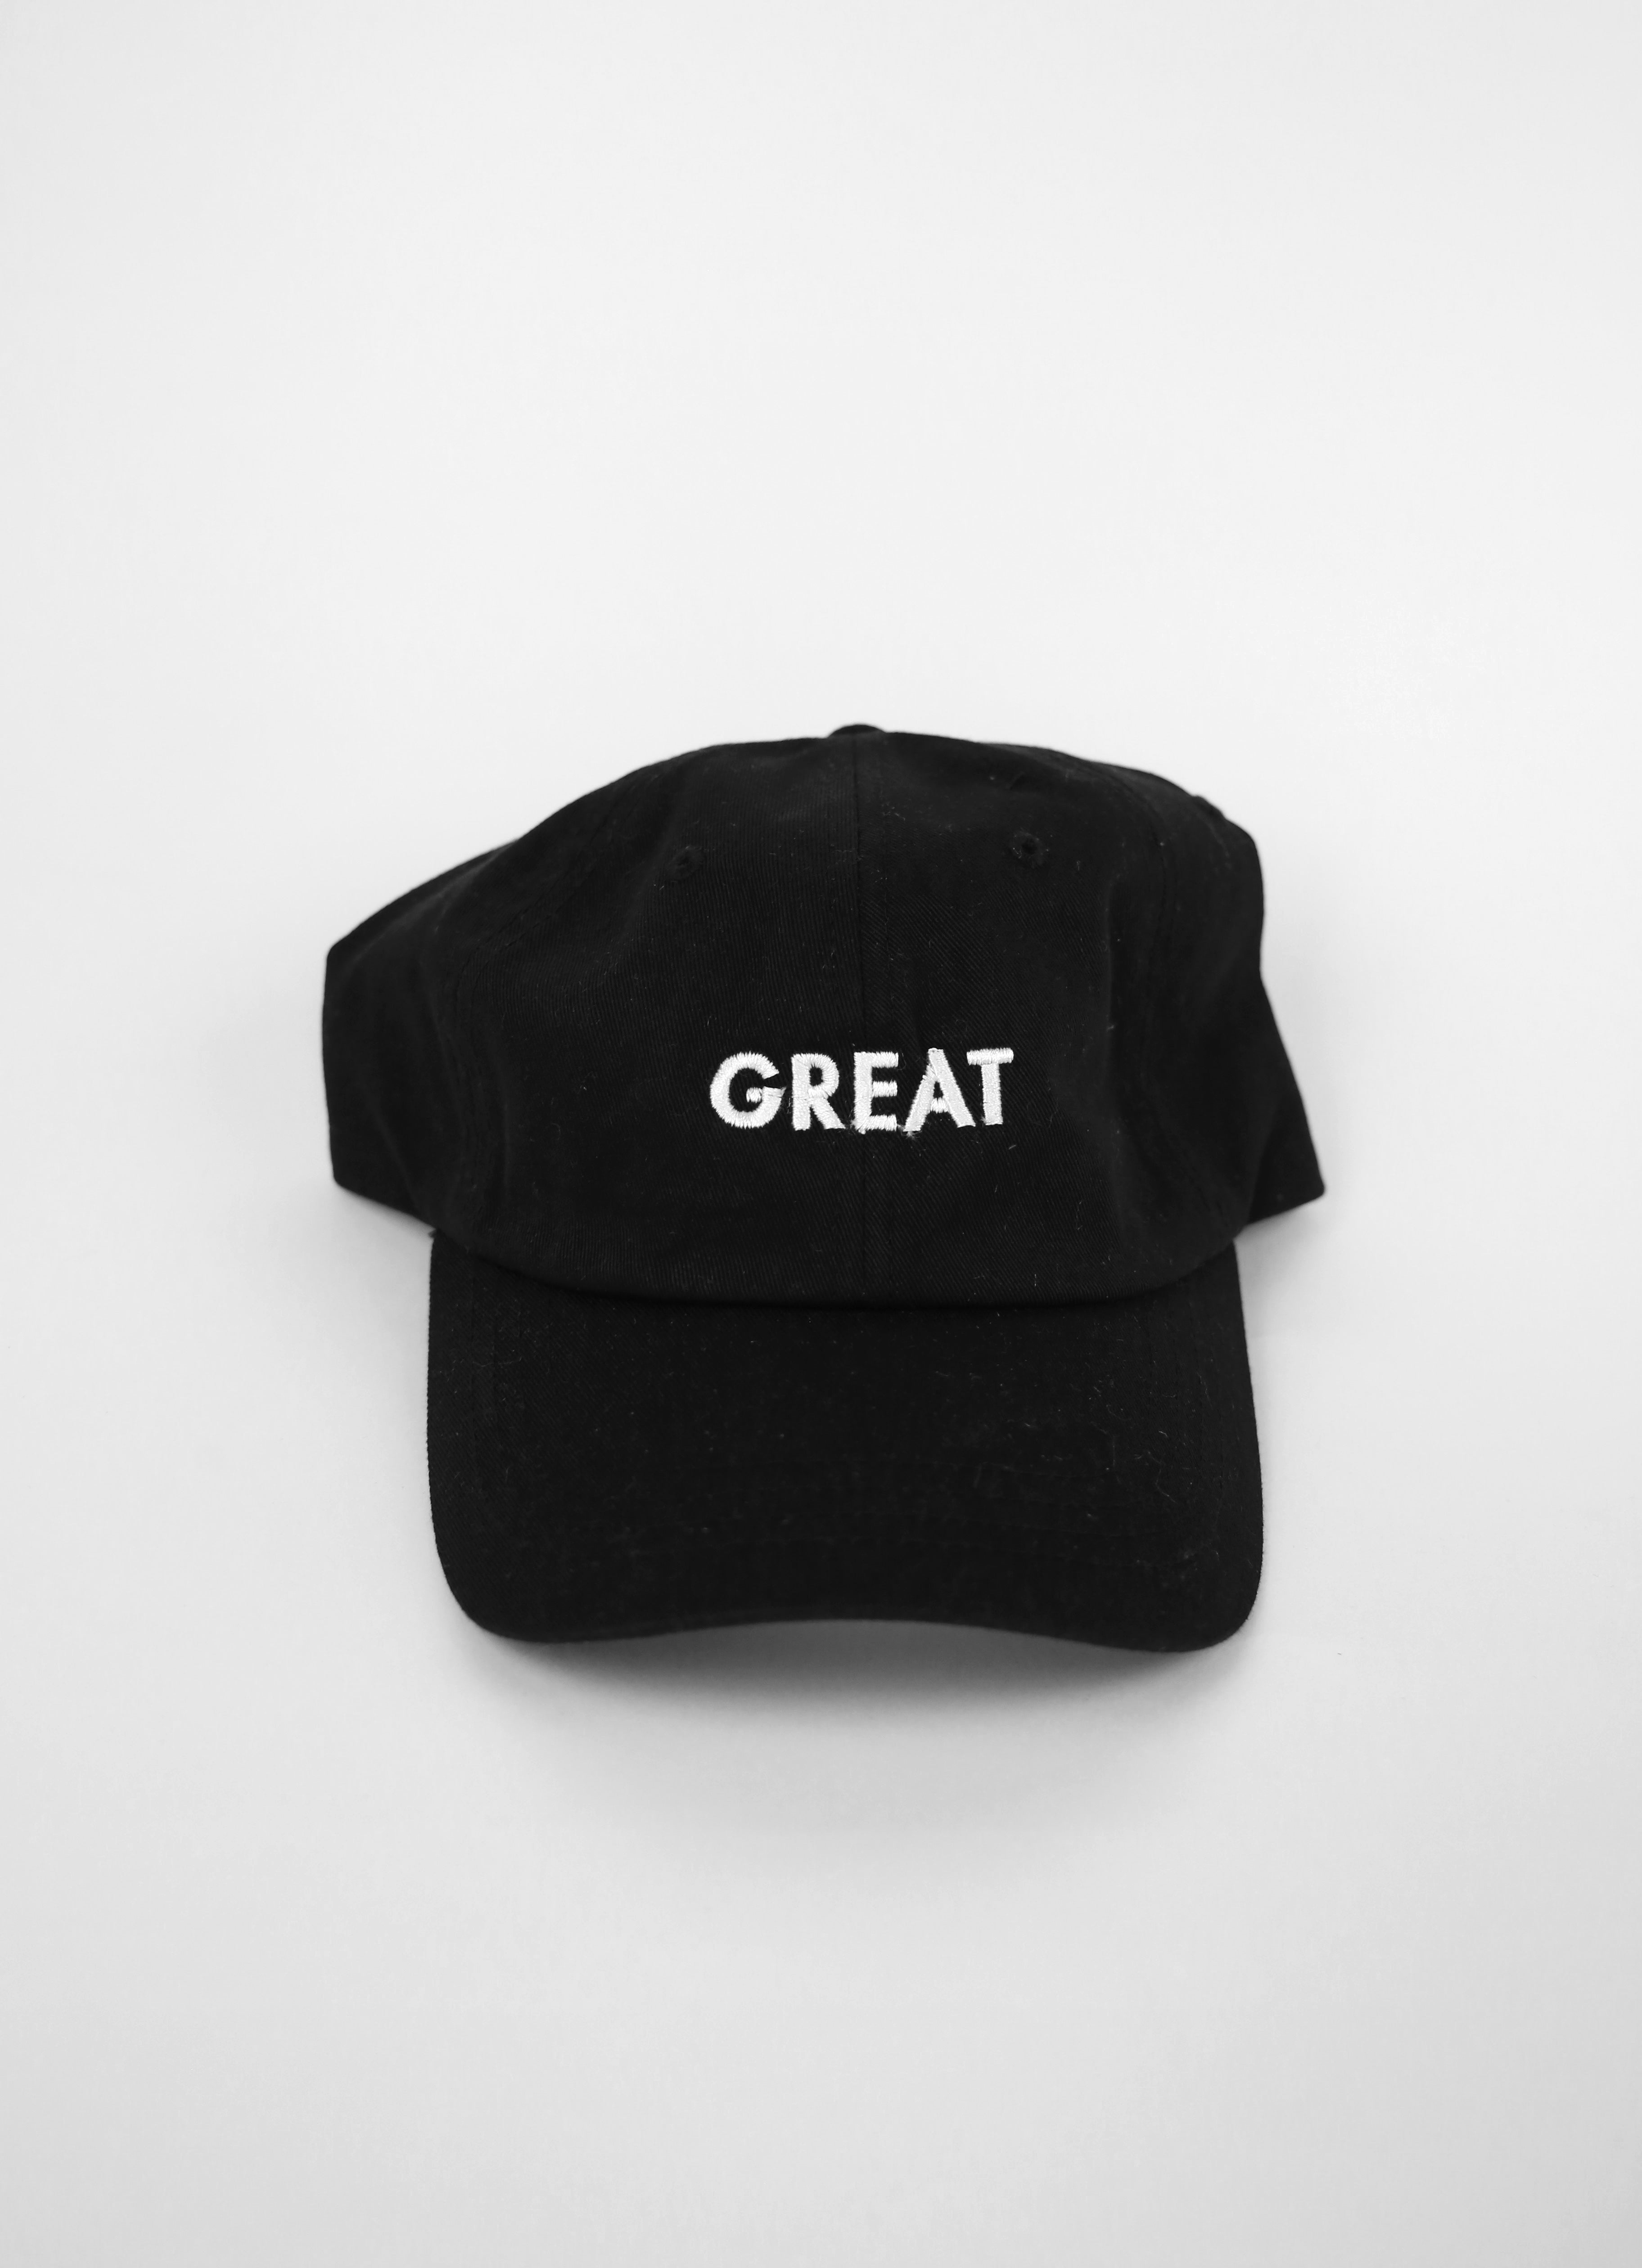 Great Hat